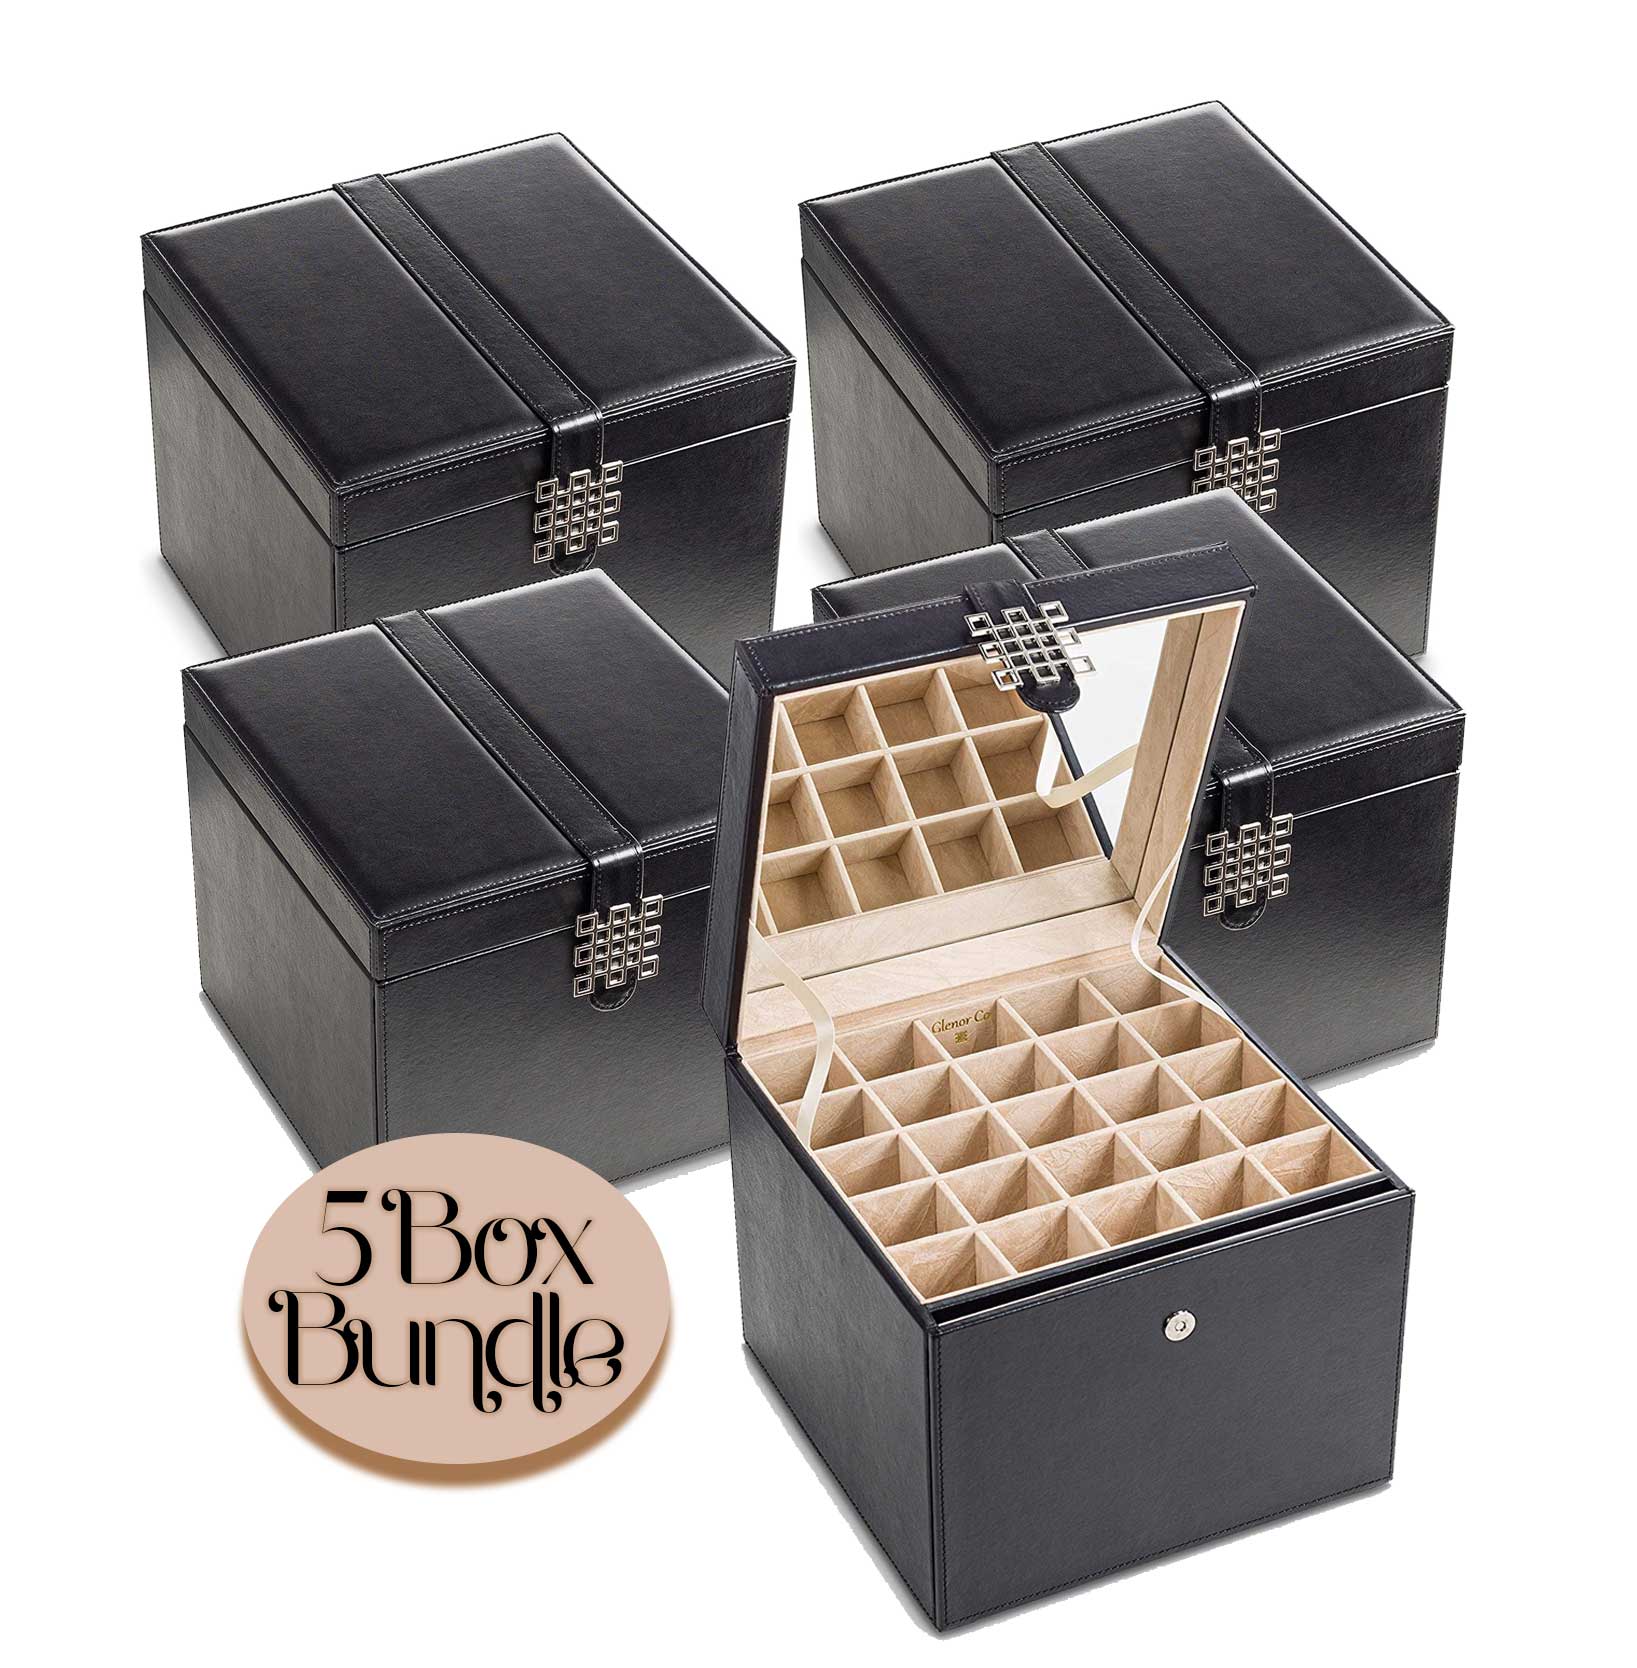 Earring Organizer Box - 75 Small & 4 Large Slots [Pack of 2 Boxes